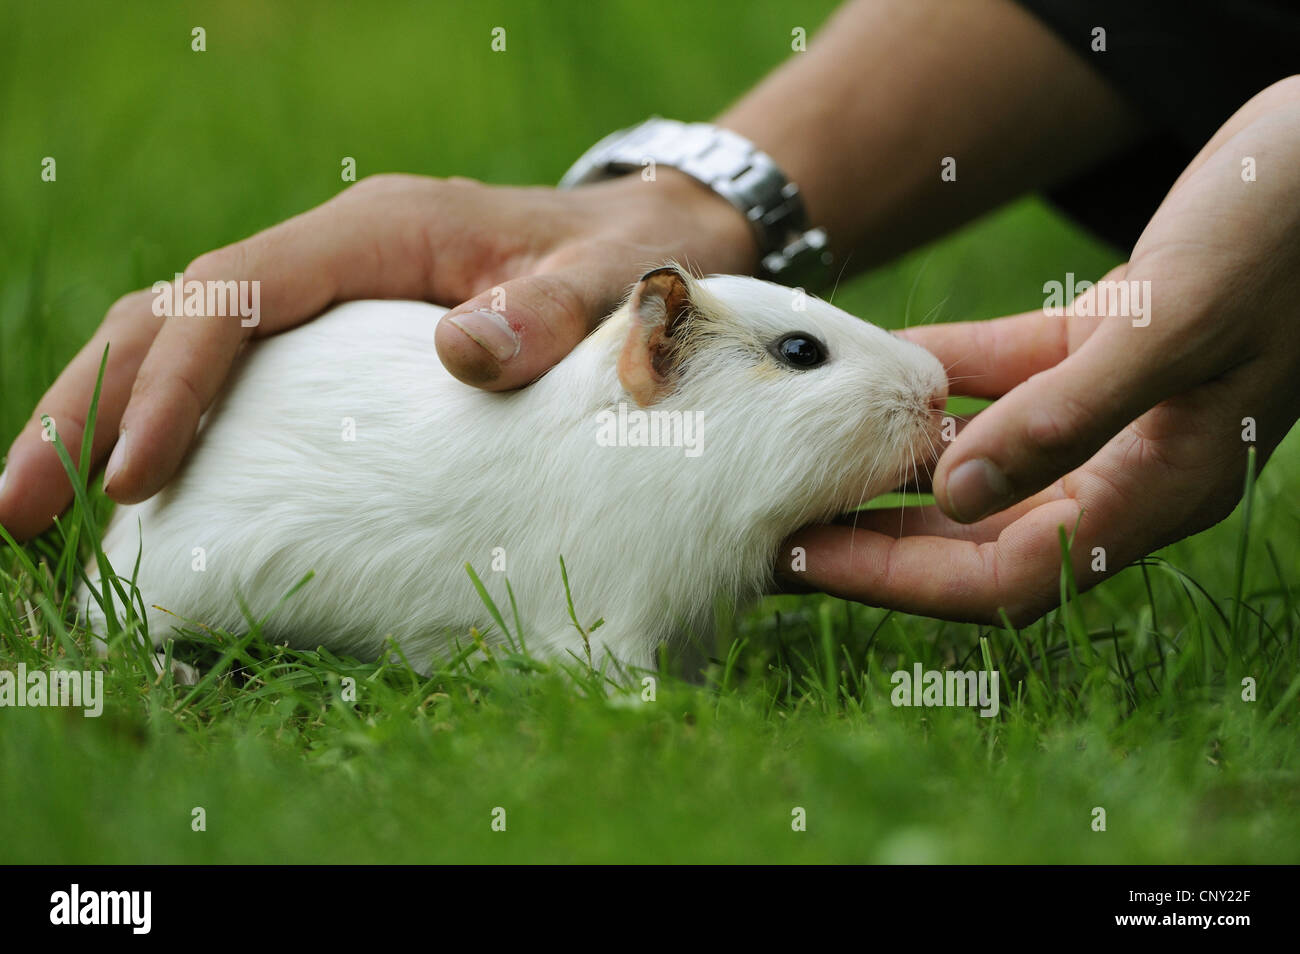 domestic Guinea pig (Cavia aperea f. porcellus), white guinea pig is stroked in a meadow Stock Photo